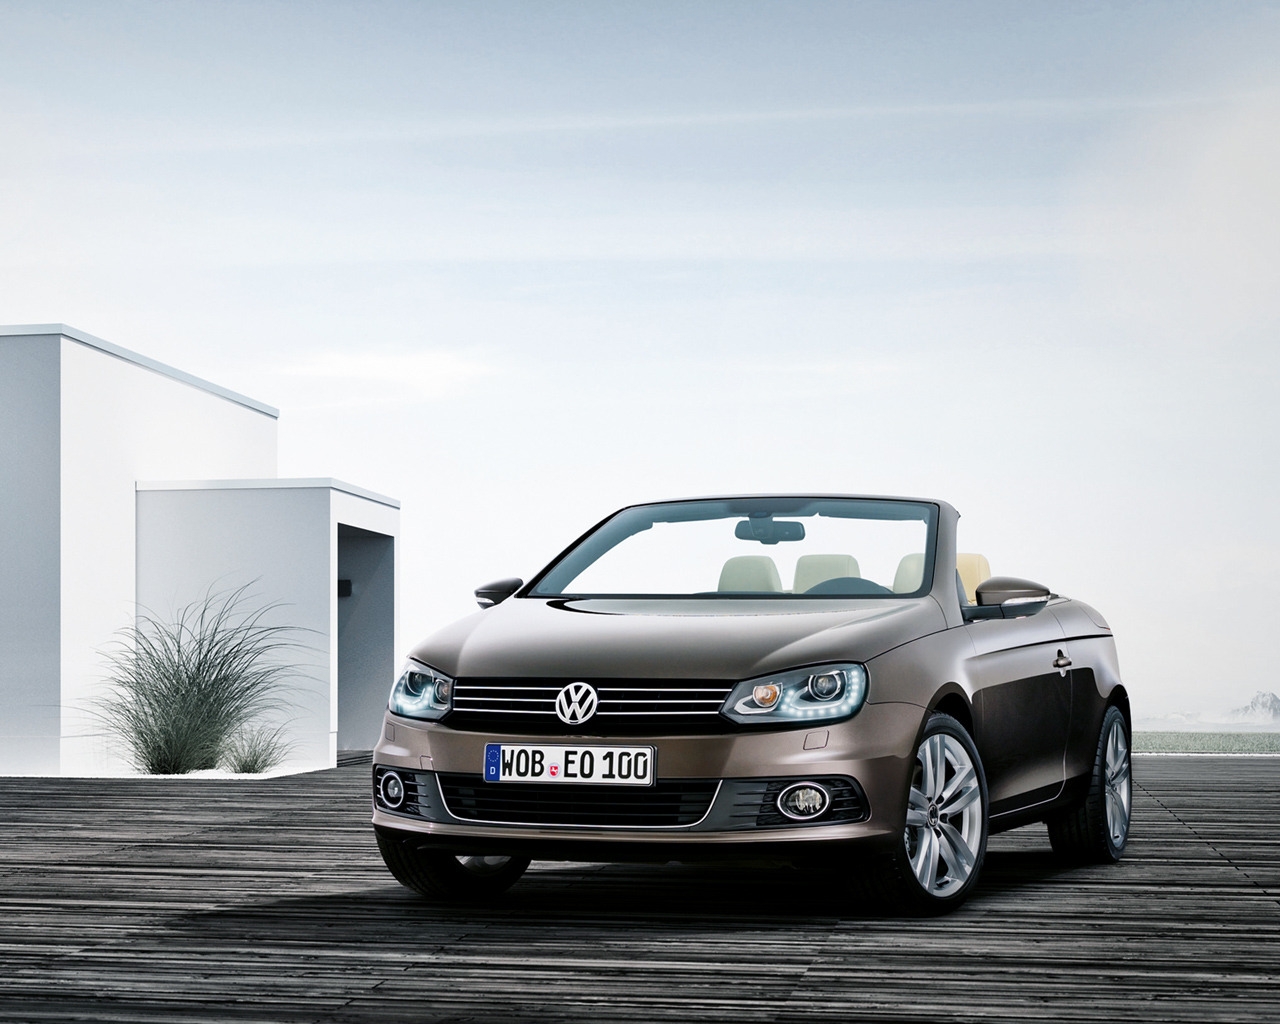 VW Eos 2011 for 1280 x 1024 resolution